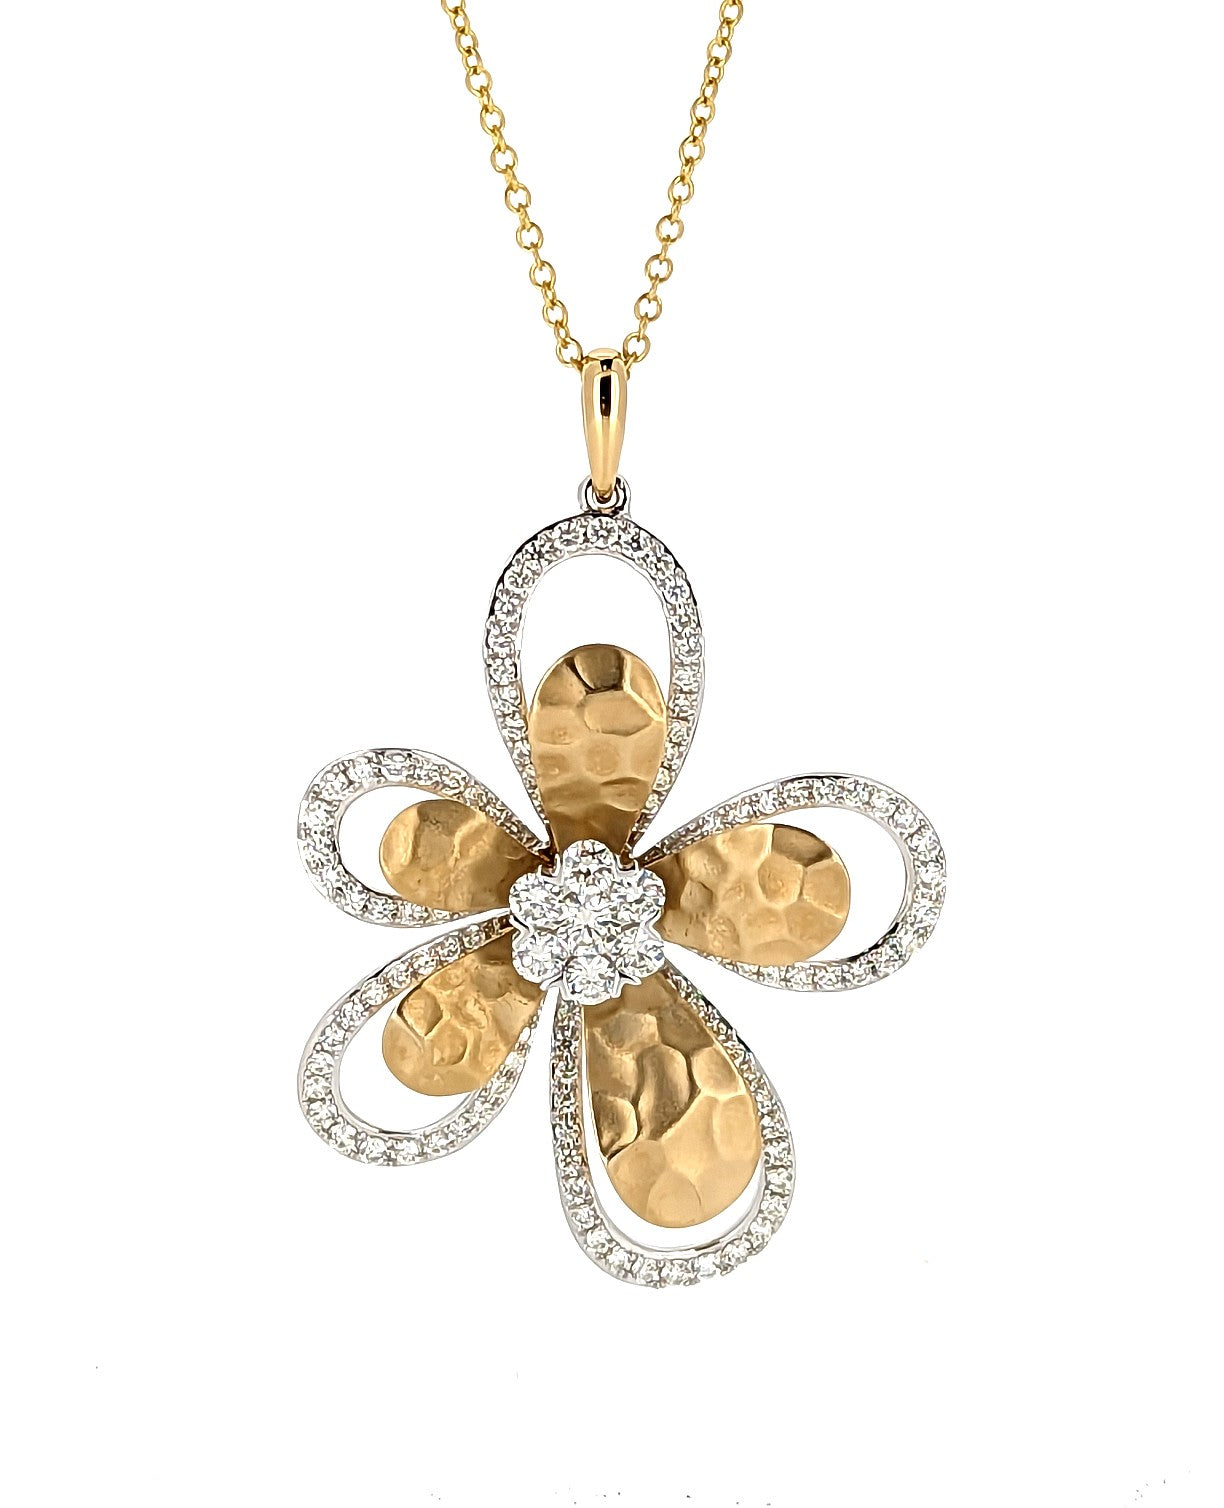 D'Oro by EFFY Diamond Flower Pendant Necklace in 14k White and Yellow Gold